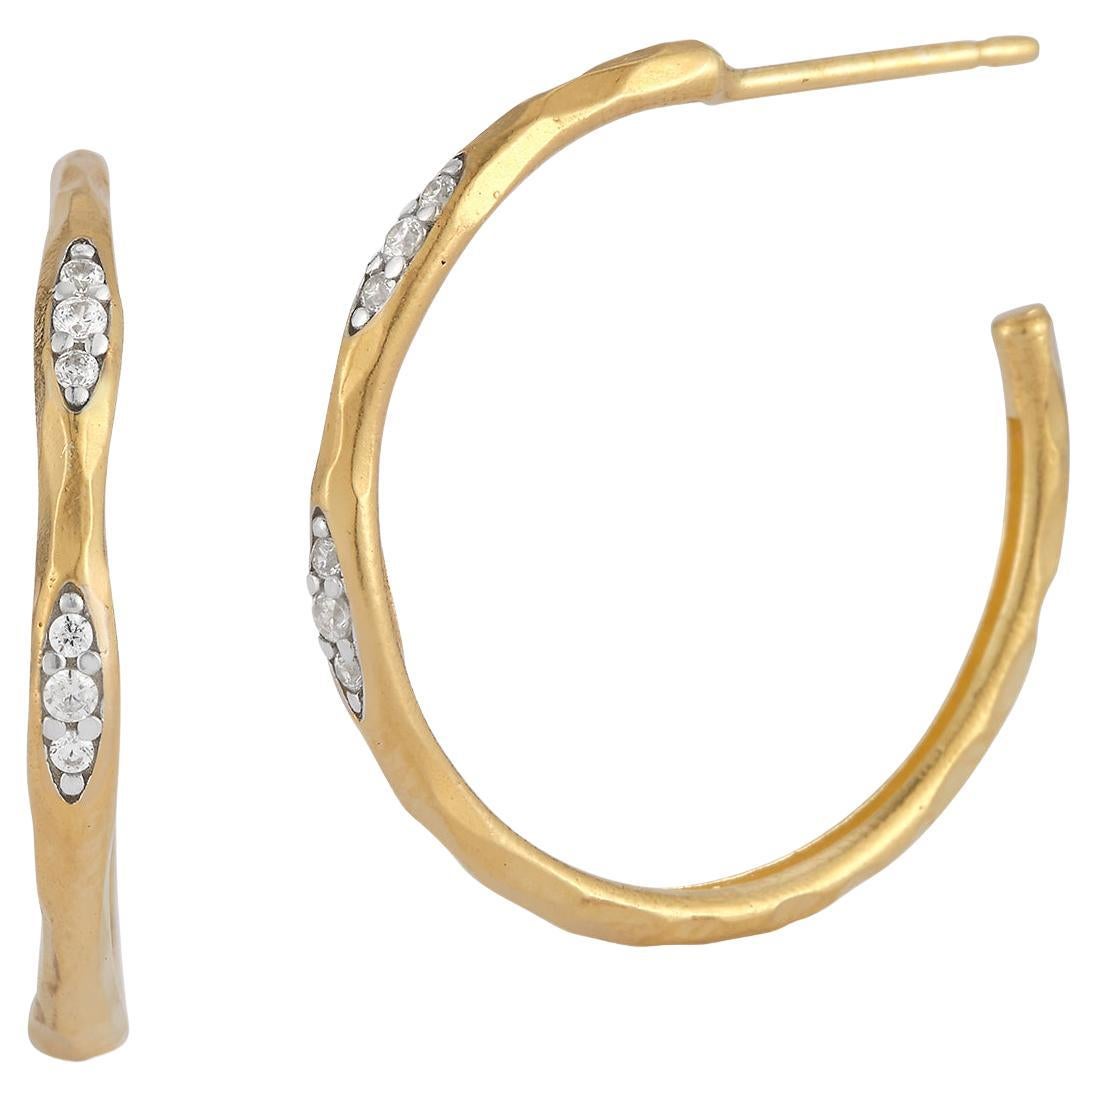 Hand-Crafted 14K Yellow Gold Hammered Hoop Earrings, Accented with Diamonds